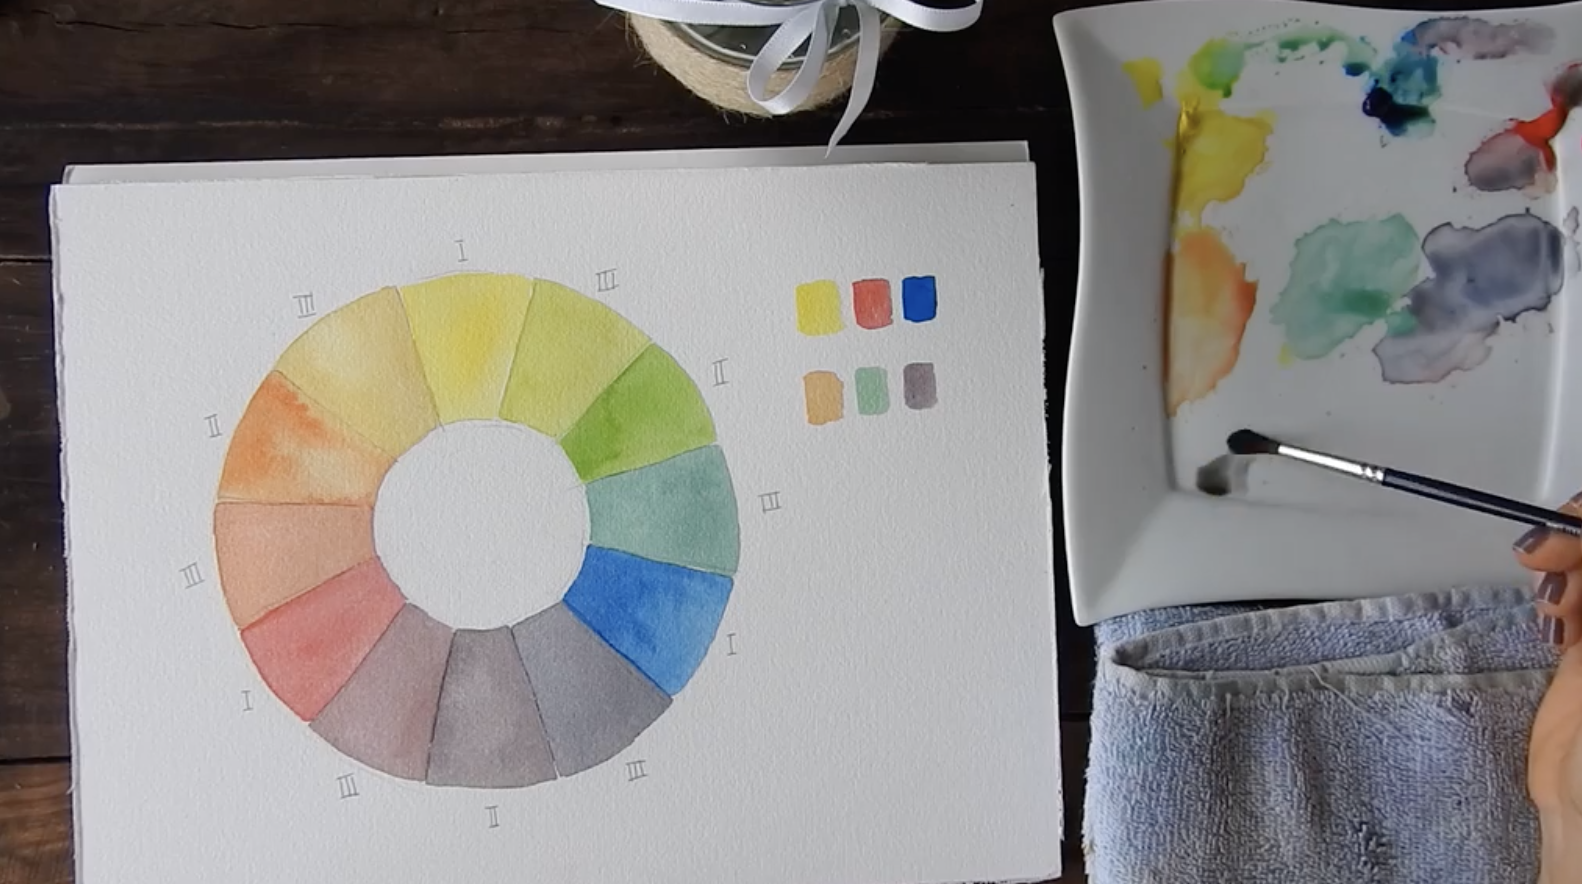 Artist's Colour Wheel, Painting & Drawing Accessories